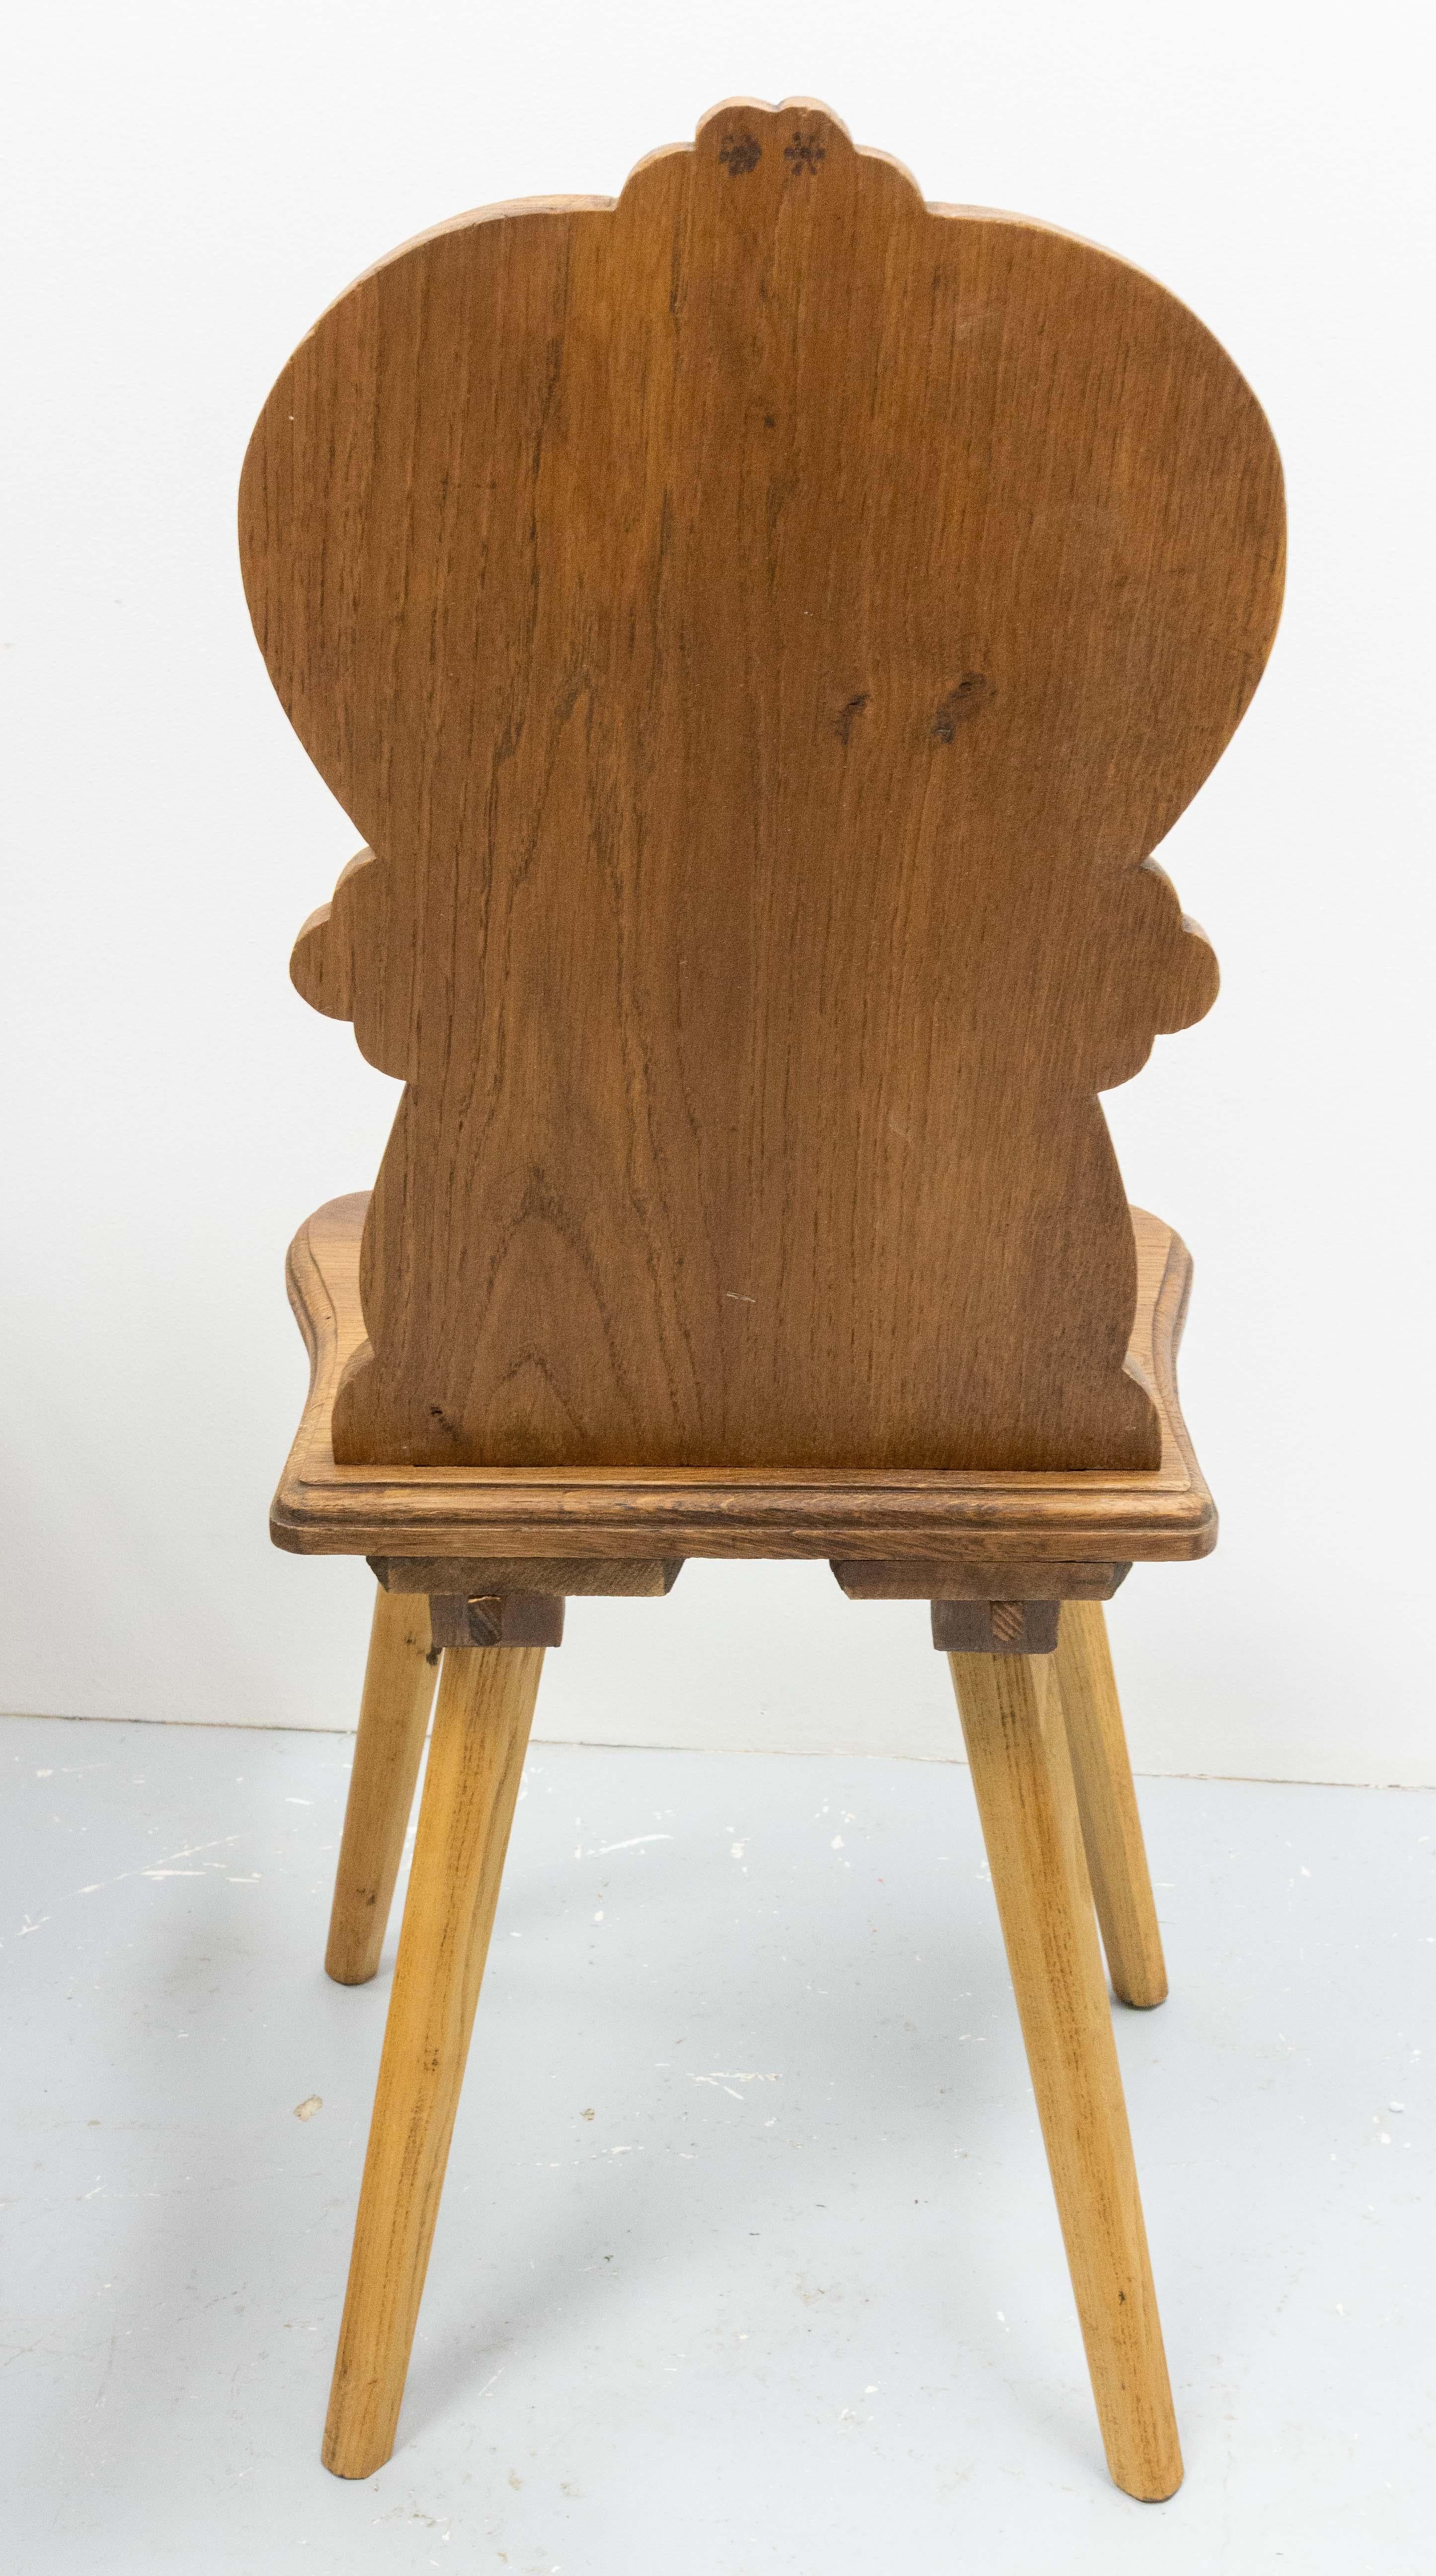 Pair Dining Chairs Swiss Alp Escabelles Oak Brutalist Style, French, Late 19th C For Sale 2